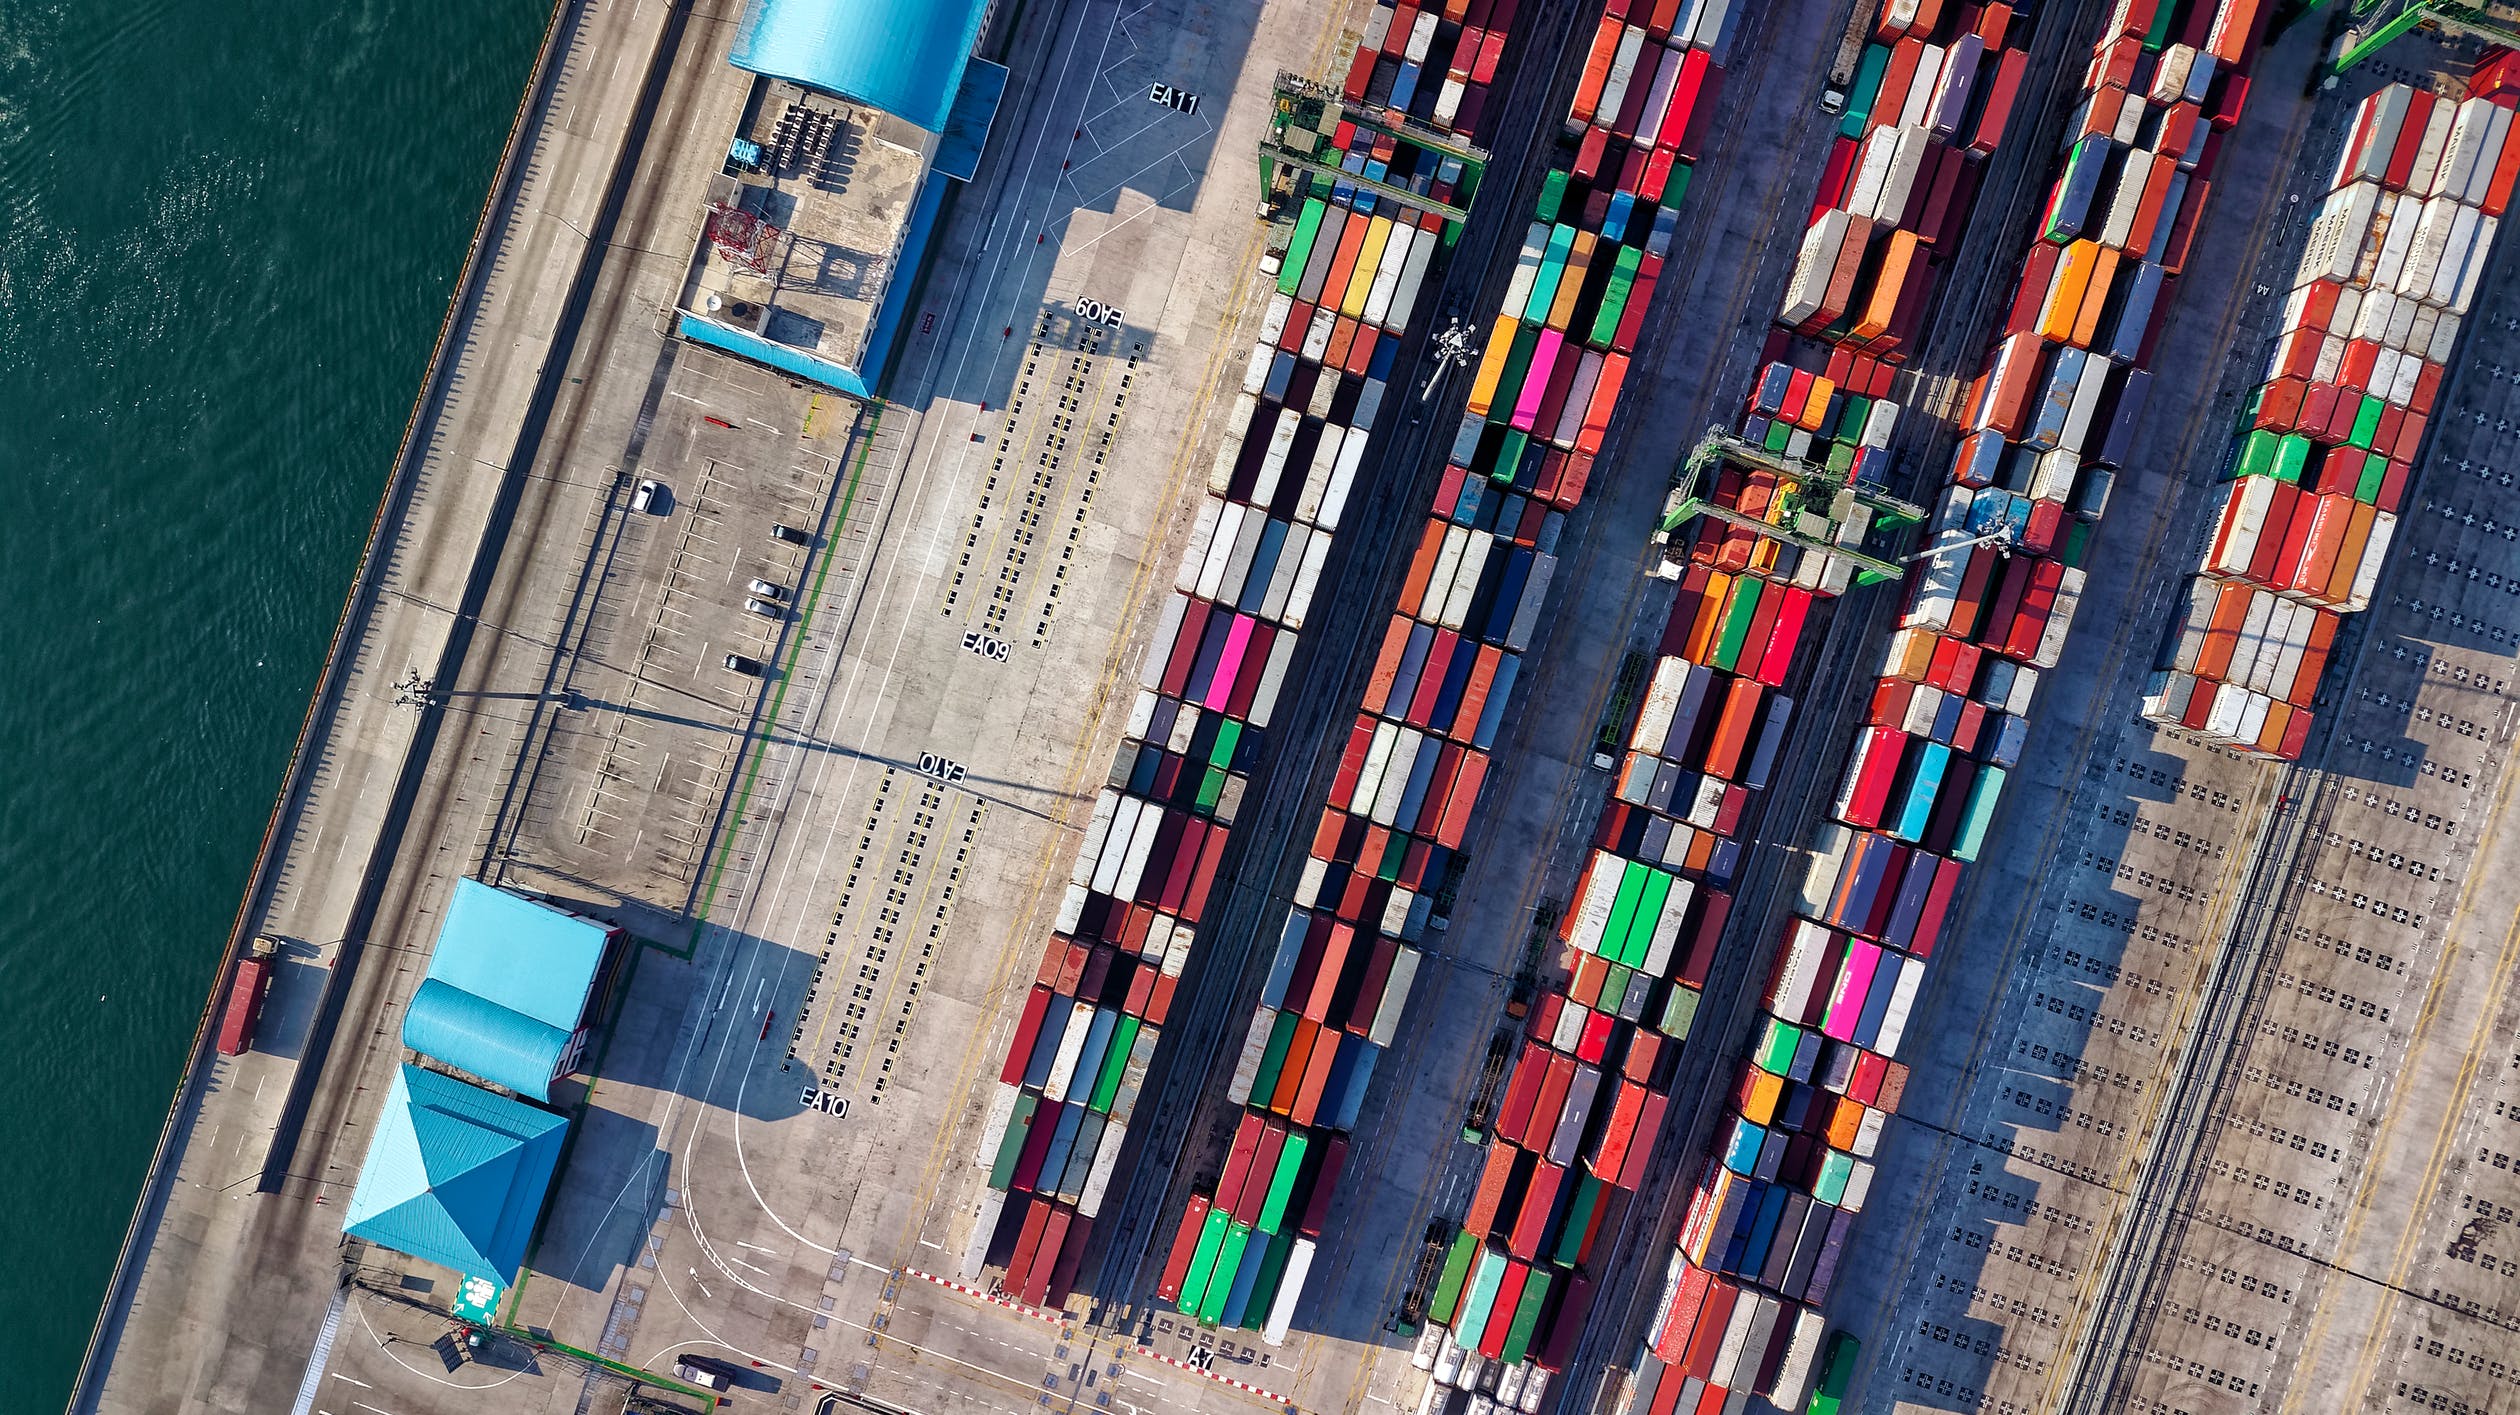 Benefits and Applications of IoT Powered Supply Chains